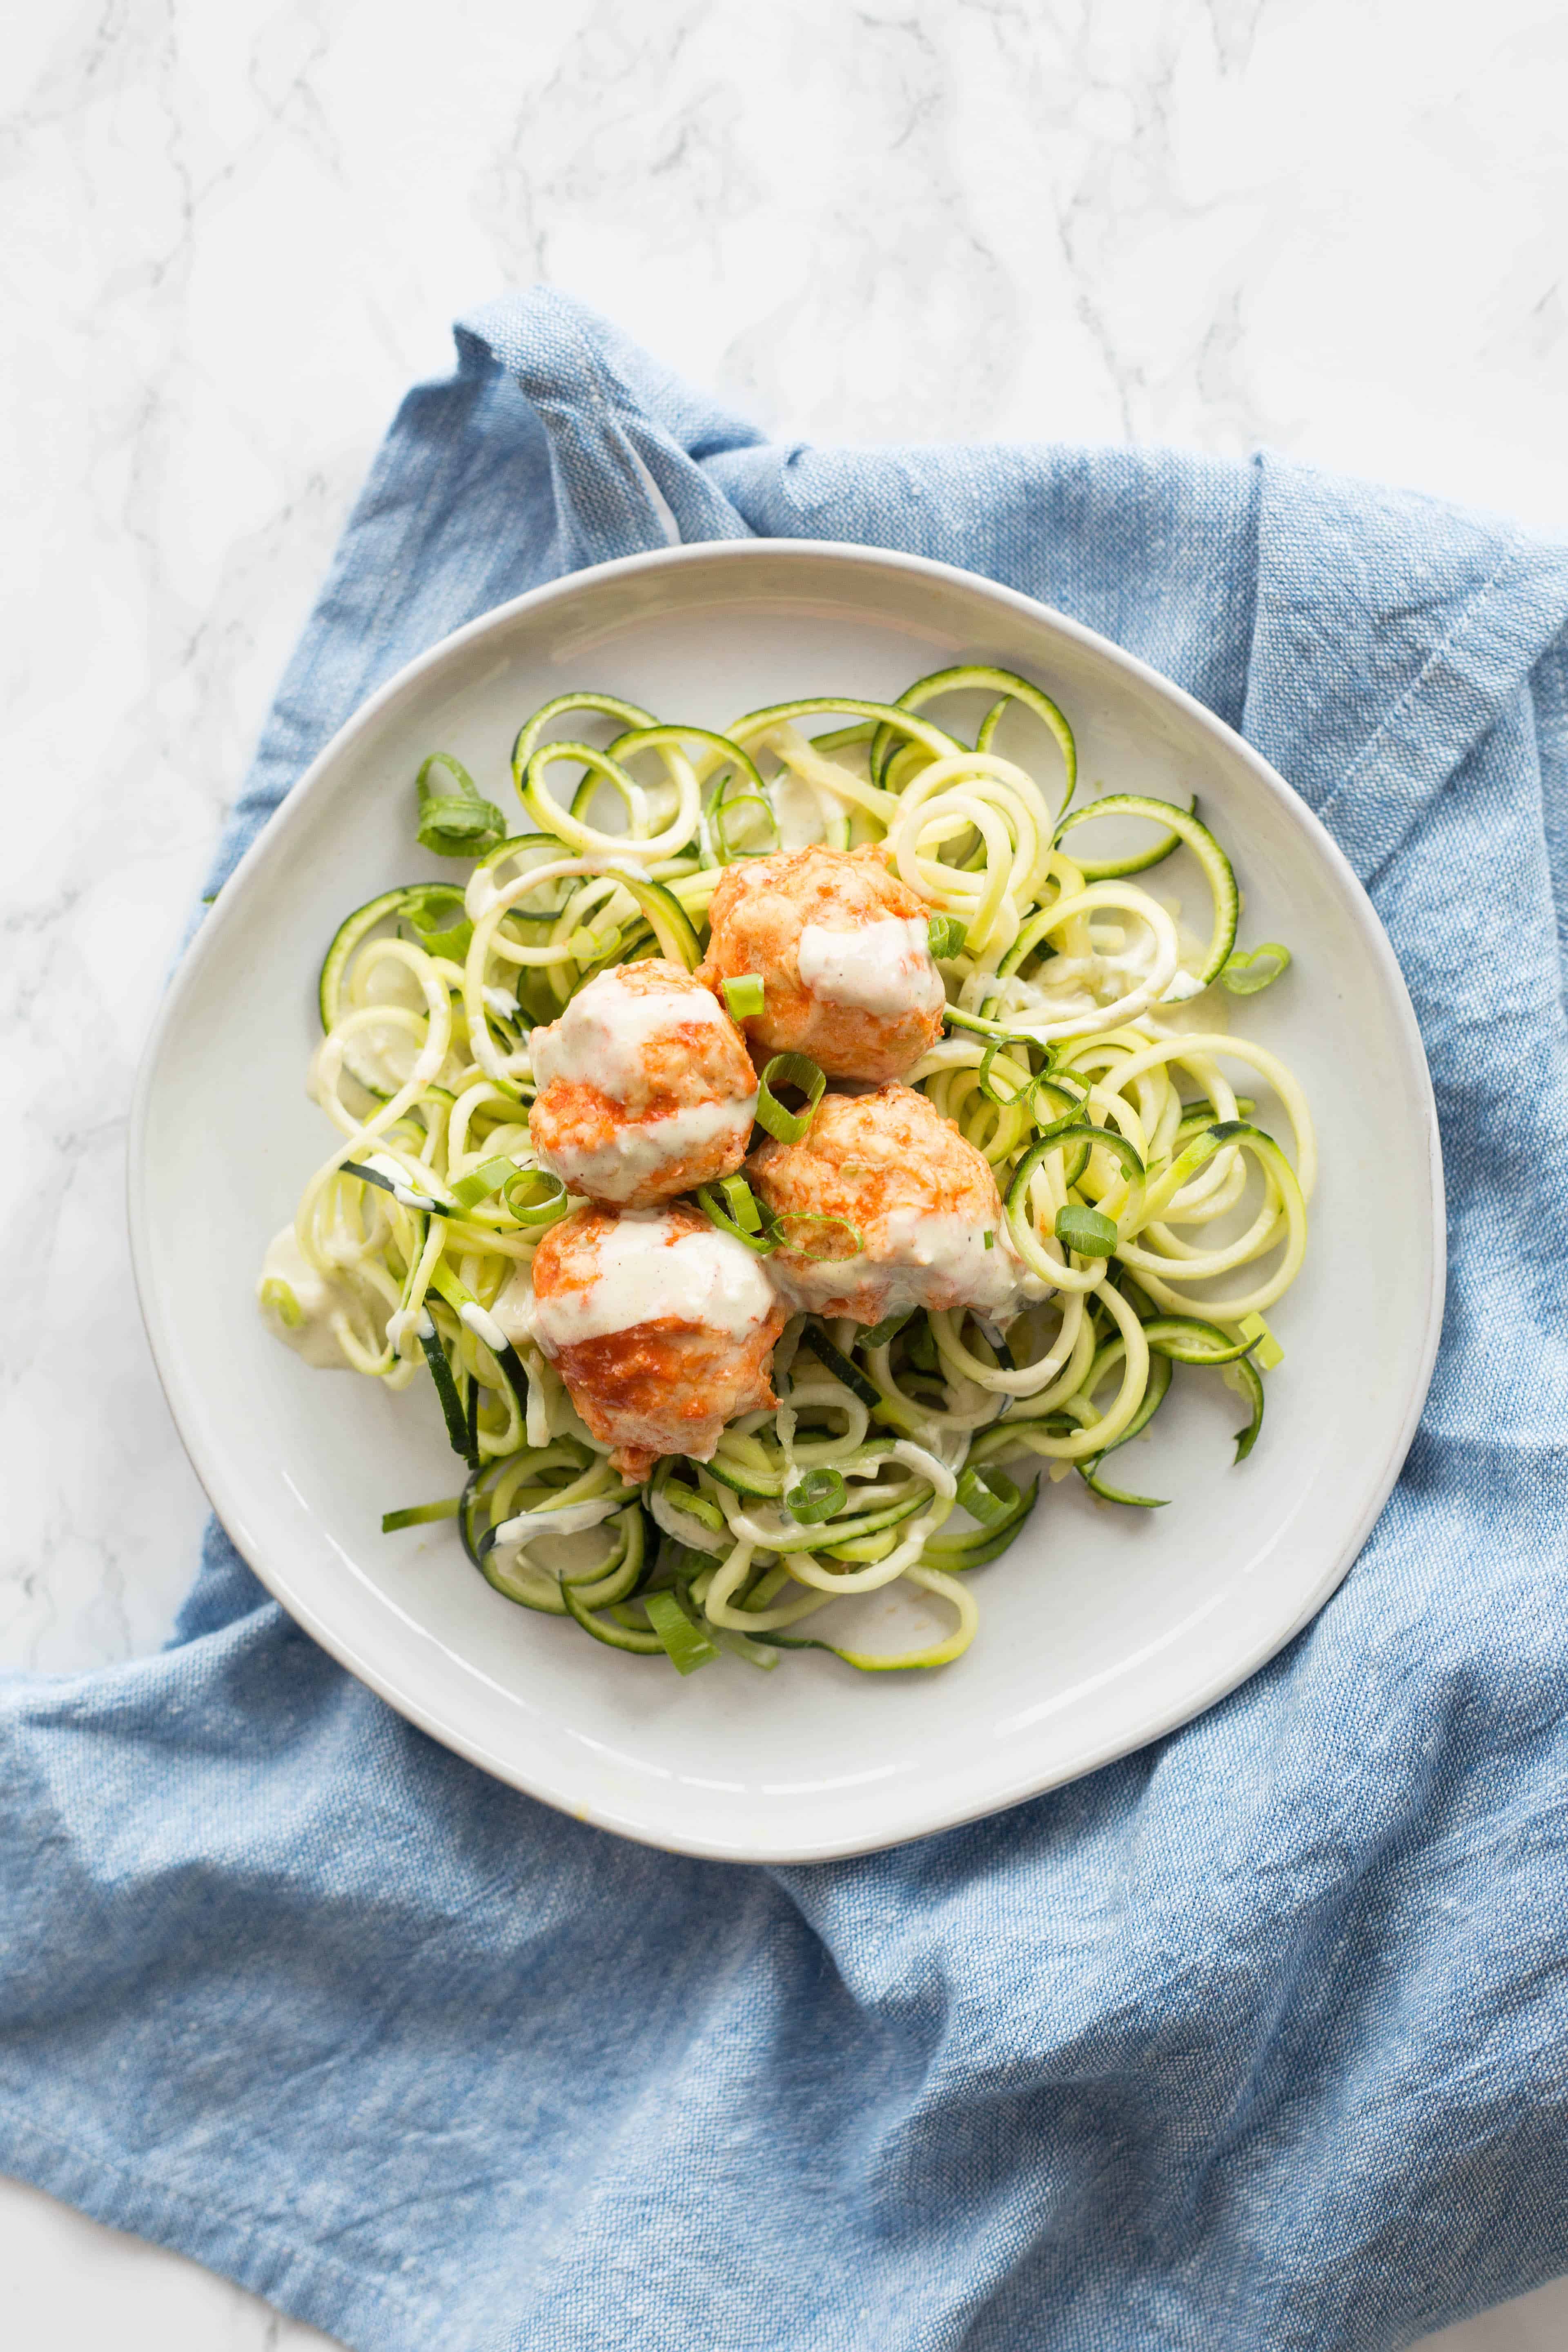 Buffalo Chicken Meatballs with Zucchini Noodles and Avocado Ranch Dressing